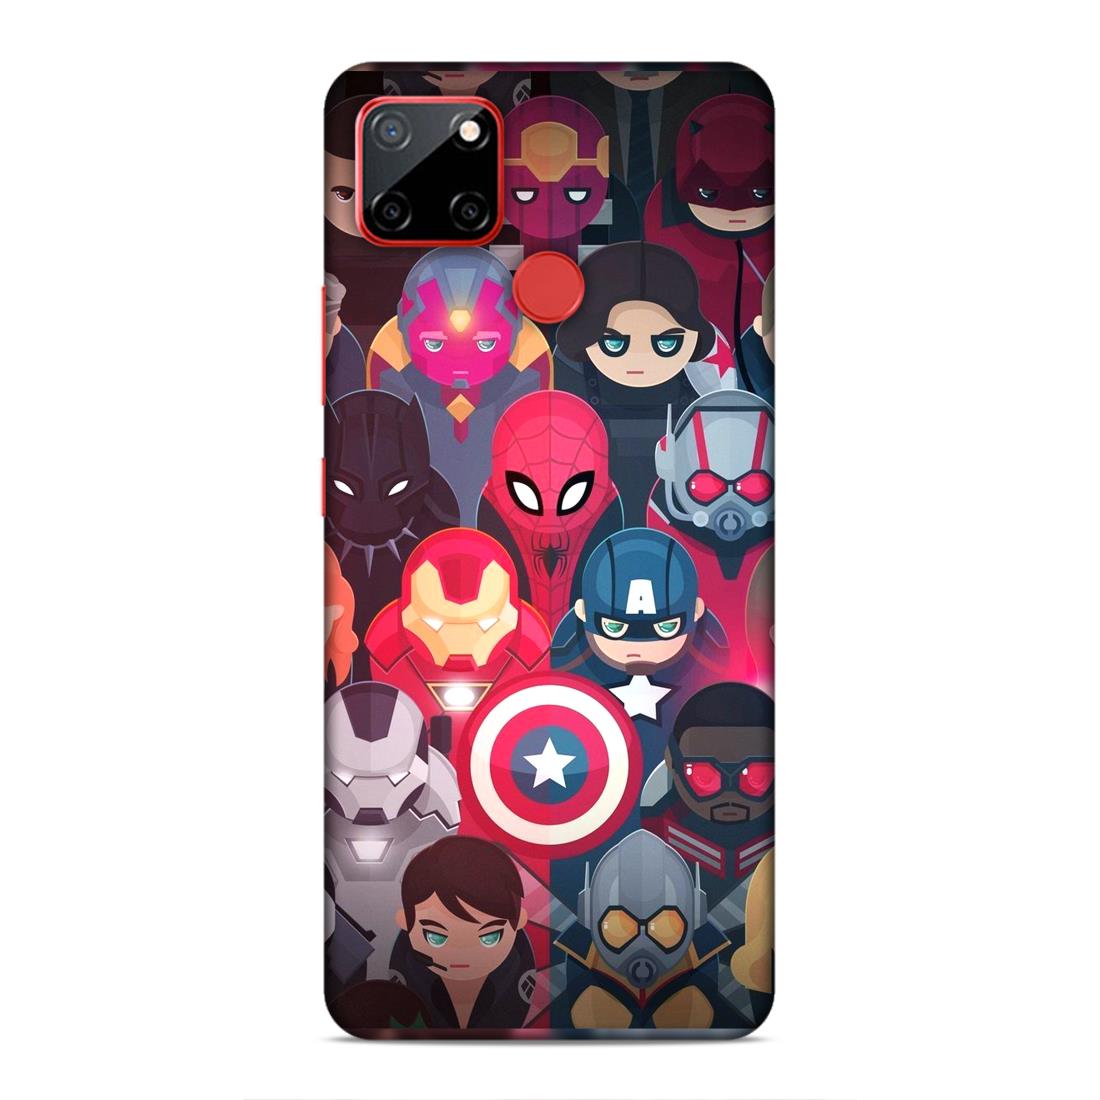 Avenger Heroes Hard Back Case For Realme C12 / C25 / C25s / Narzo 20 / 30A